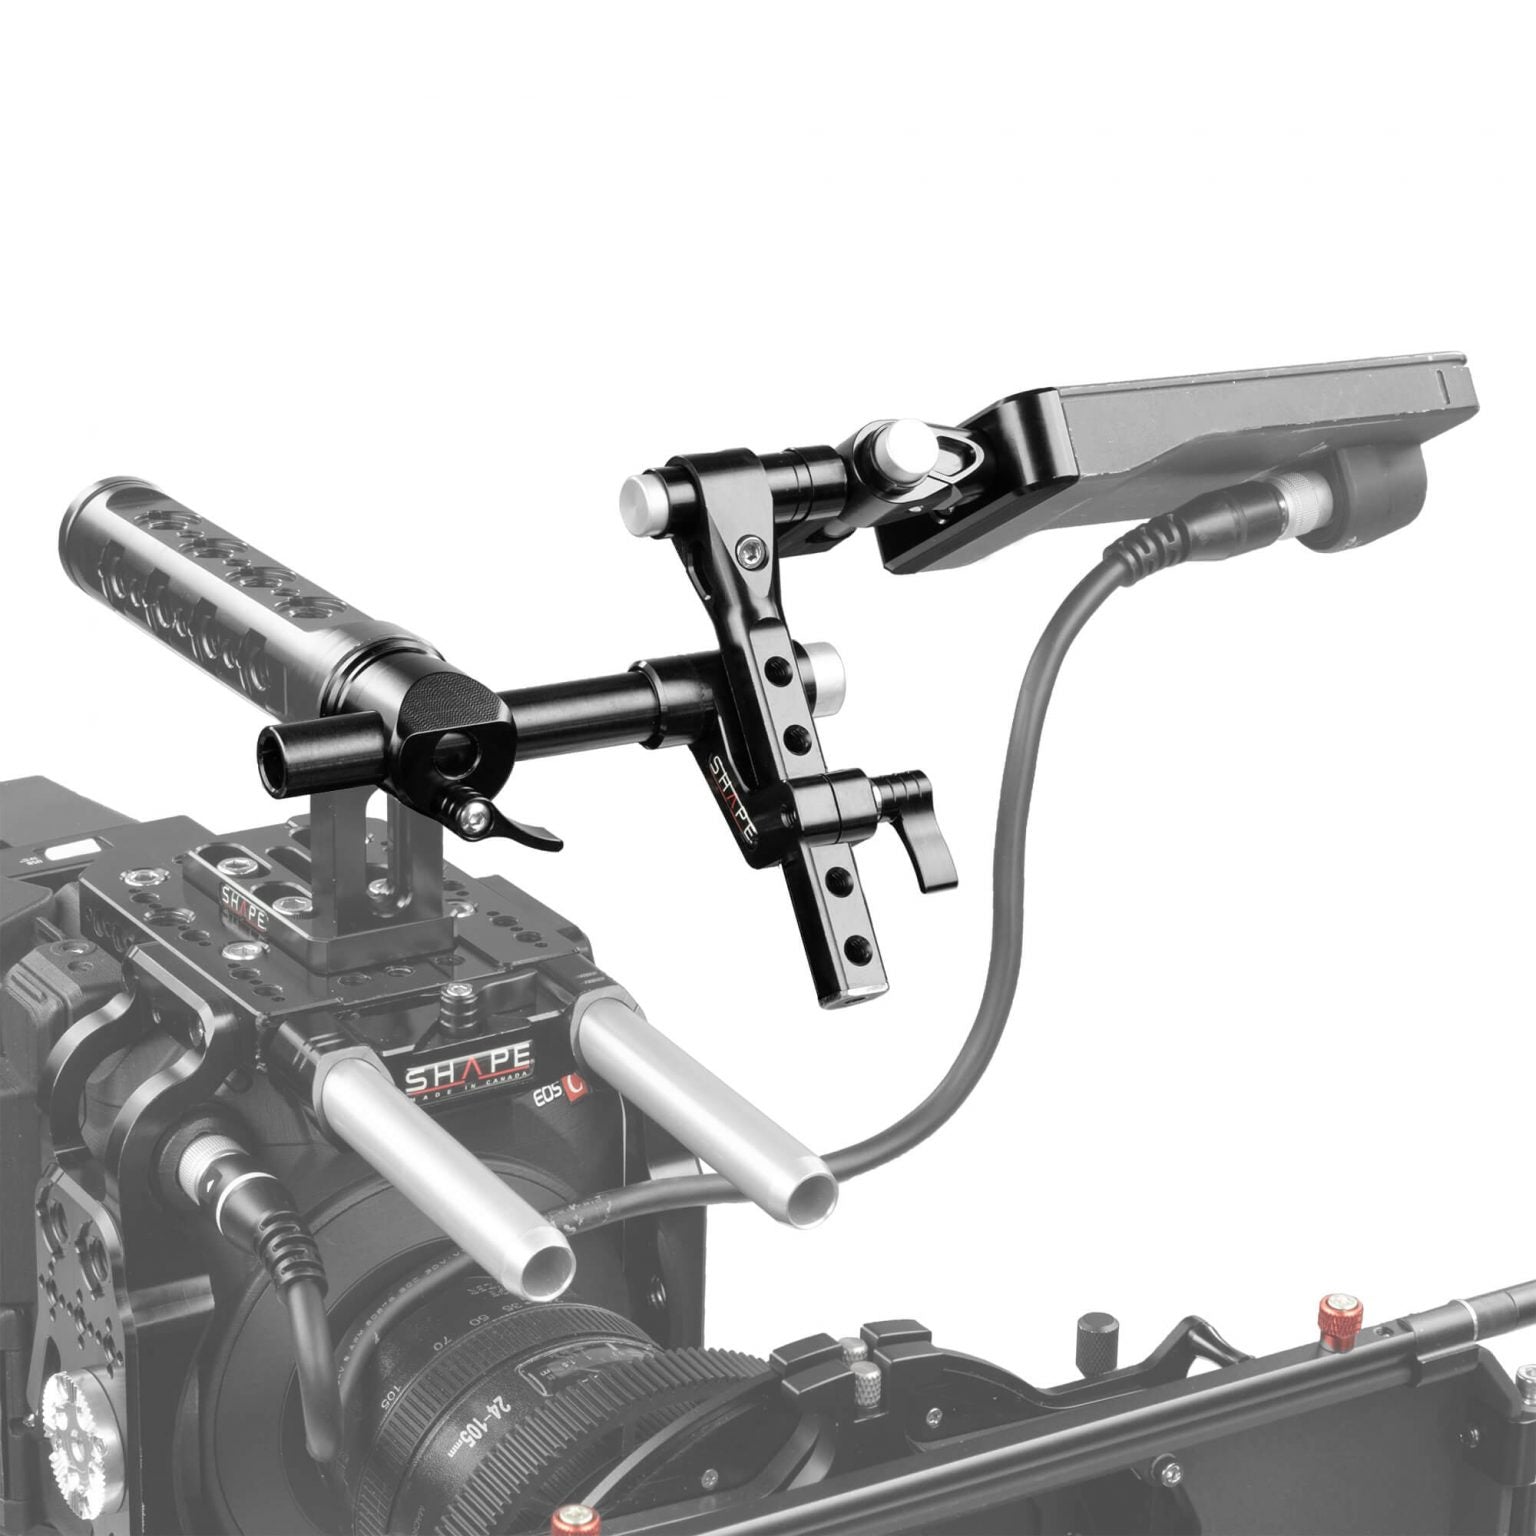 SHAPE View Finder Mount for Canon C500 MKII/C300 MKIII - SHAPE wlb